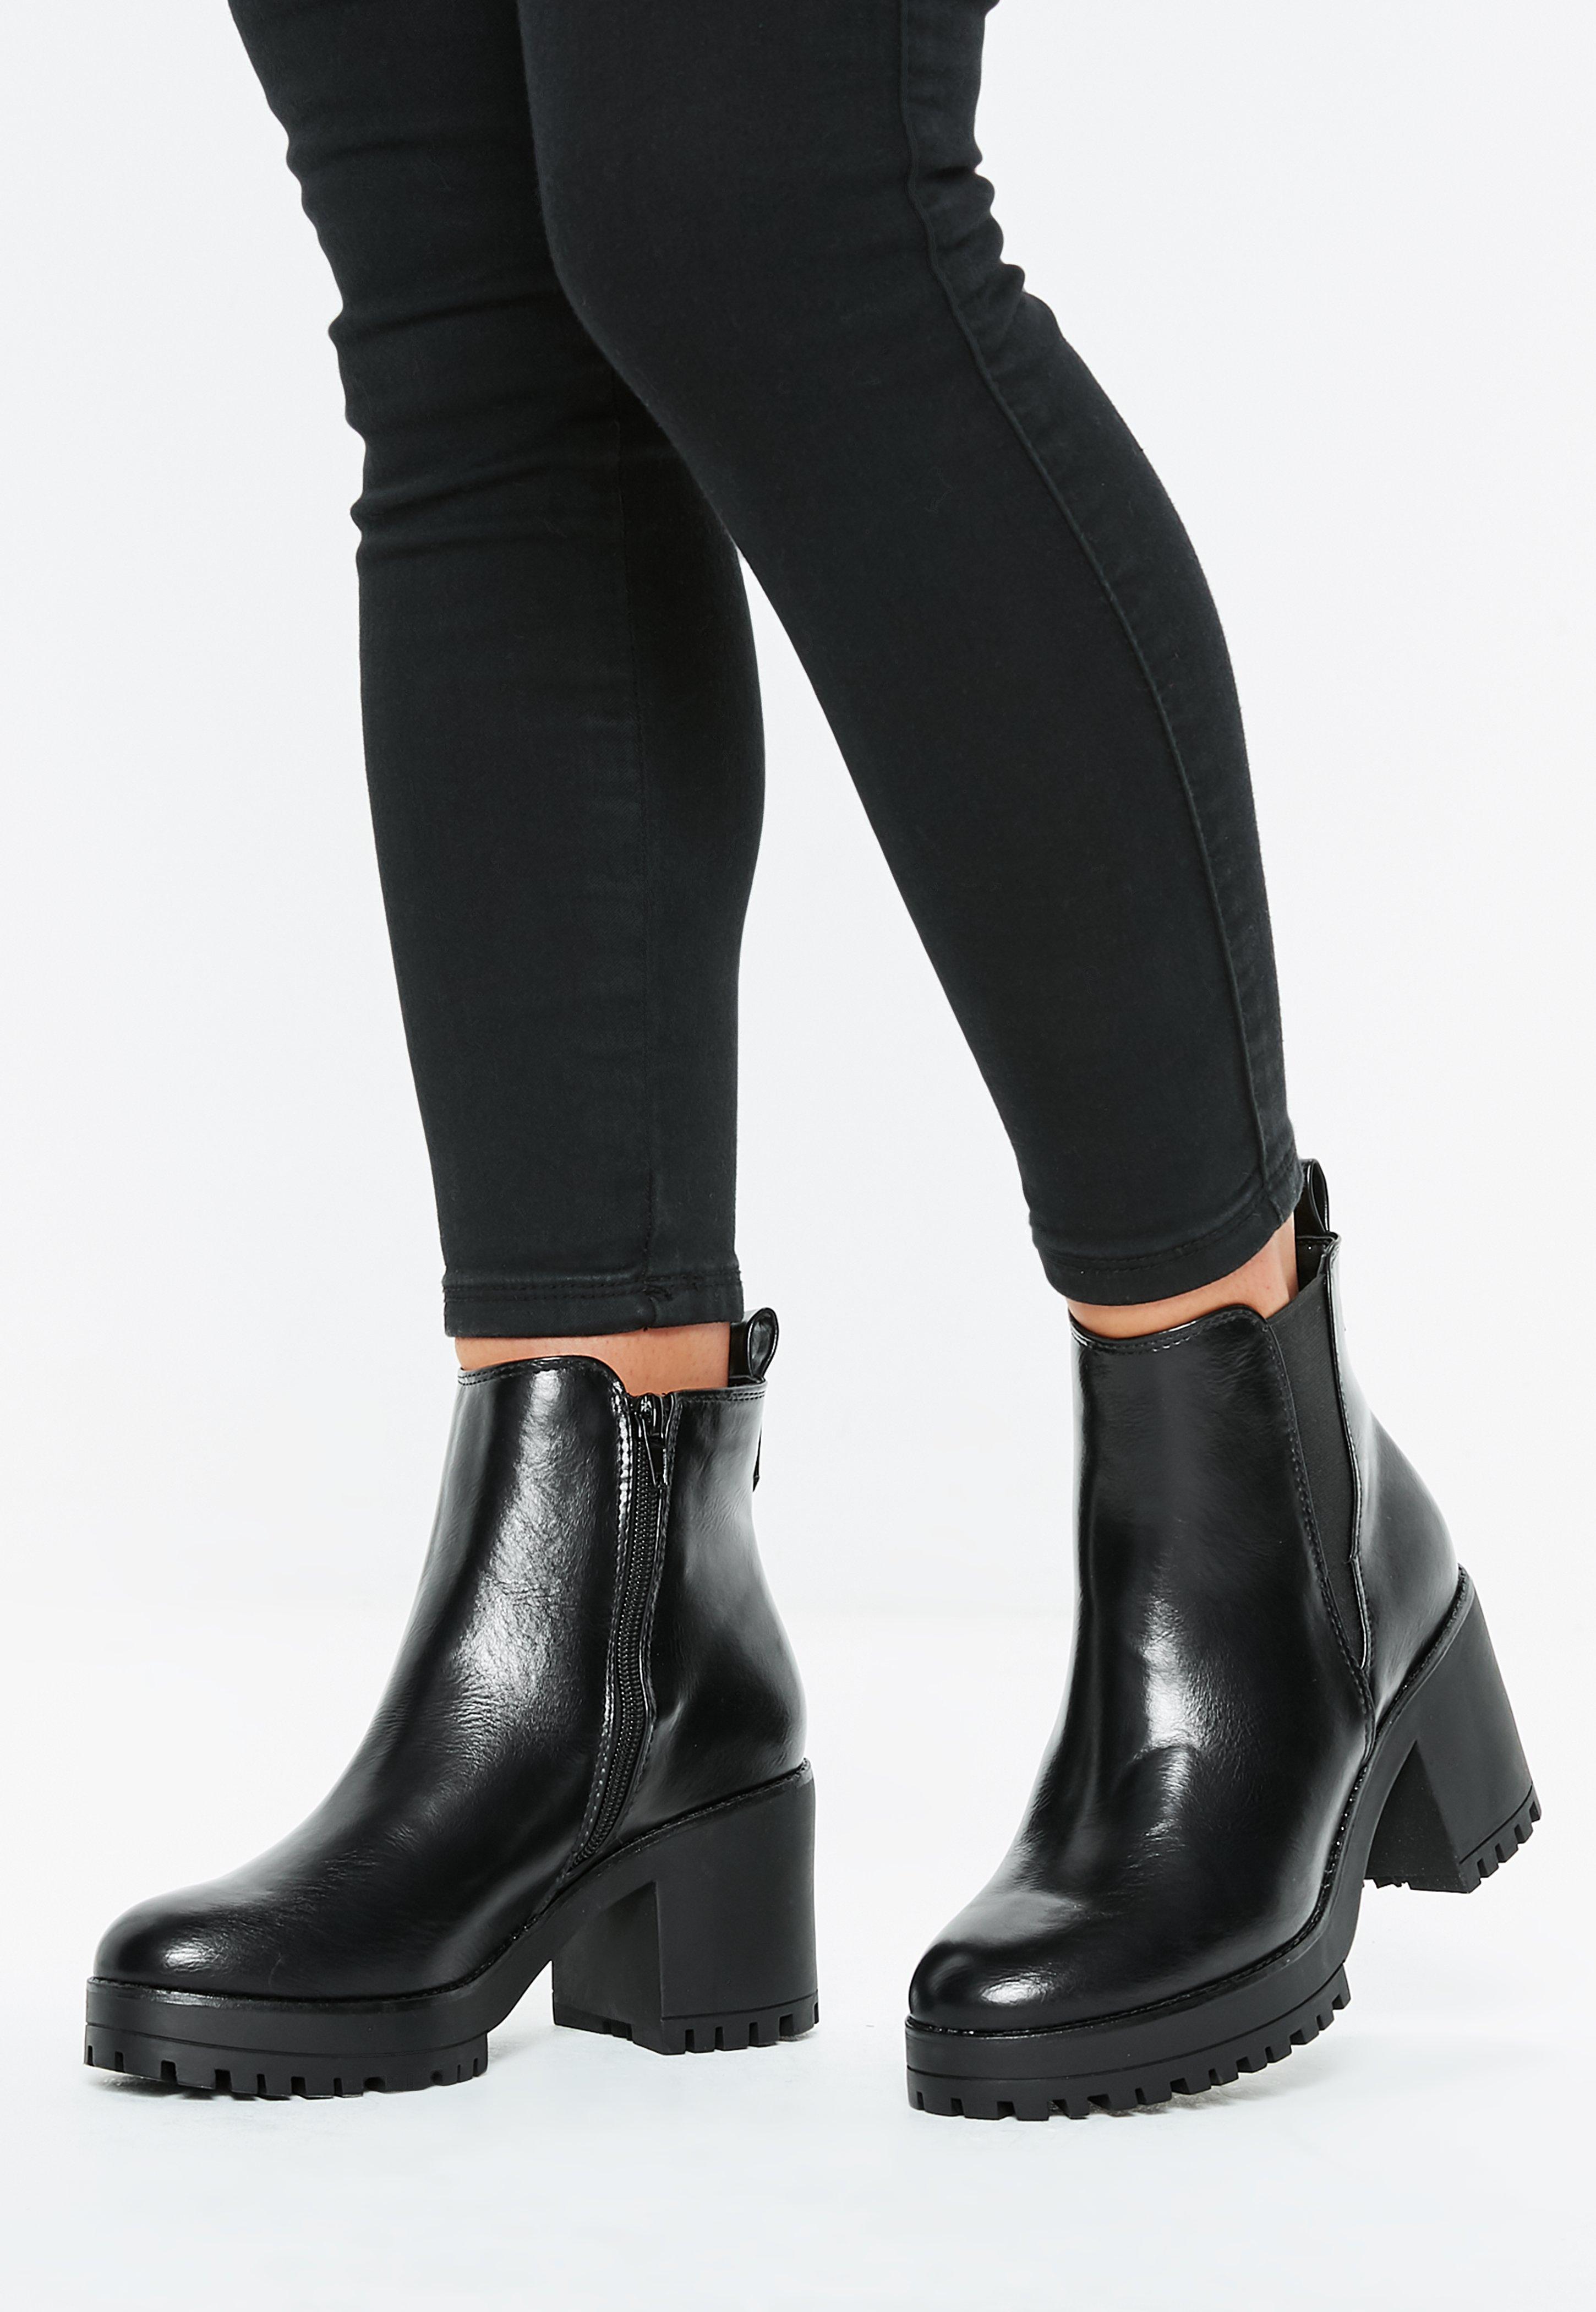 Lyst - Missguided Black Faux Leather Chunky Chelsea Ankle Boots in Black